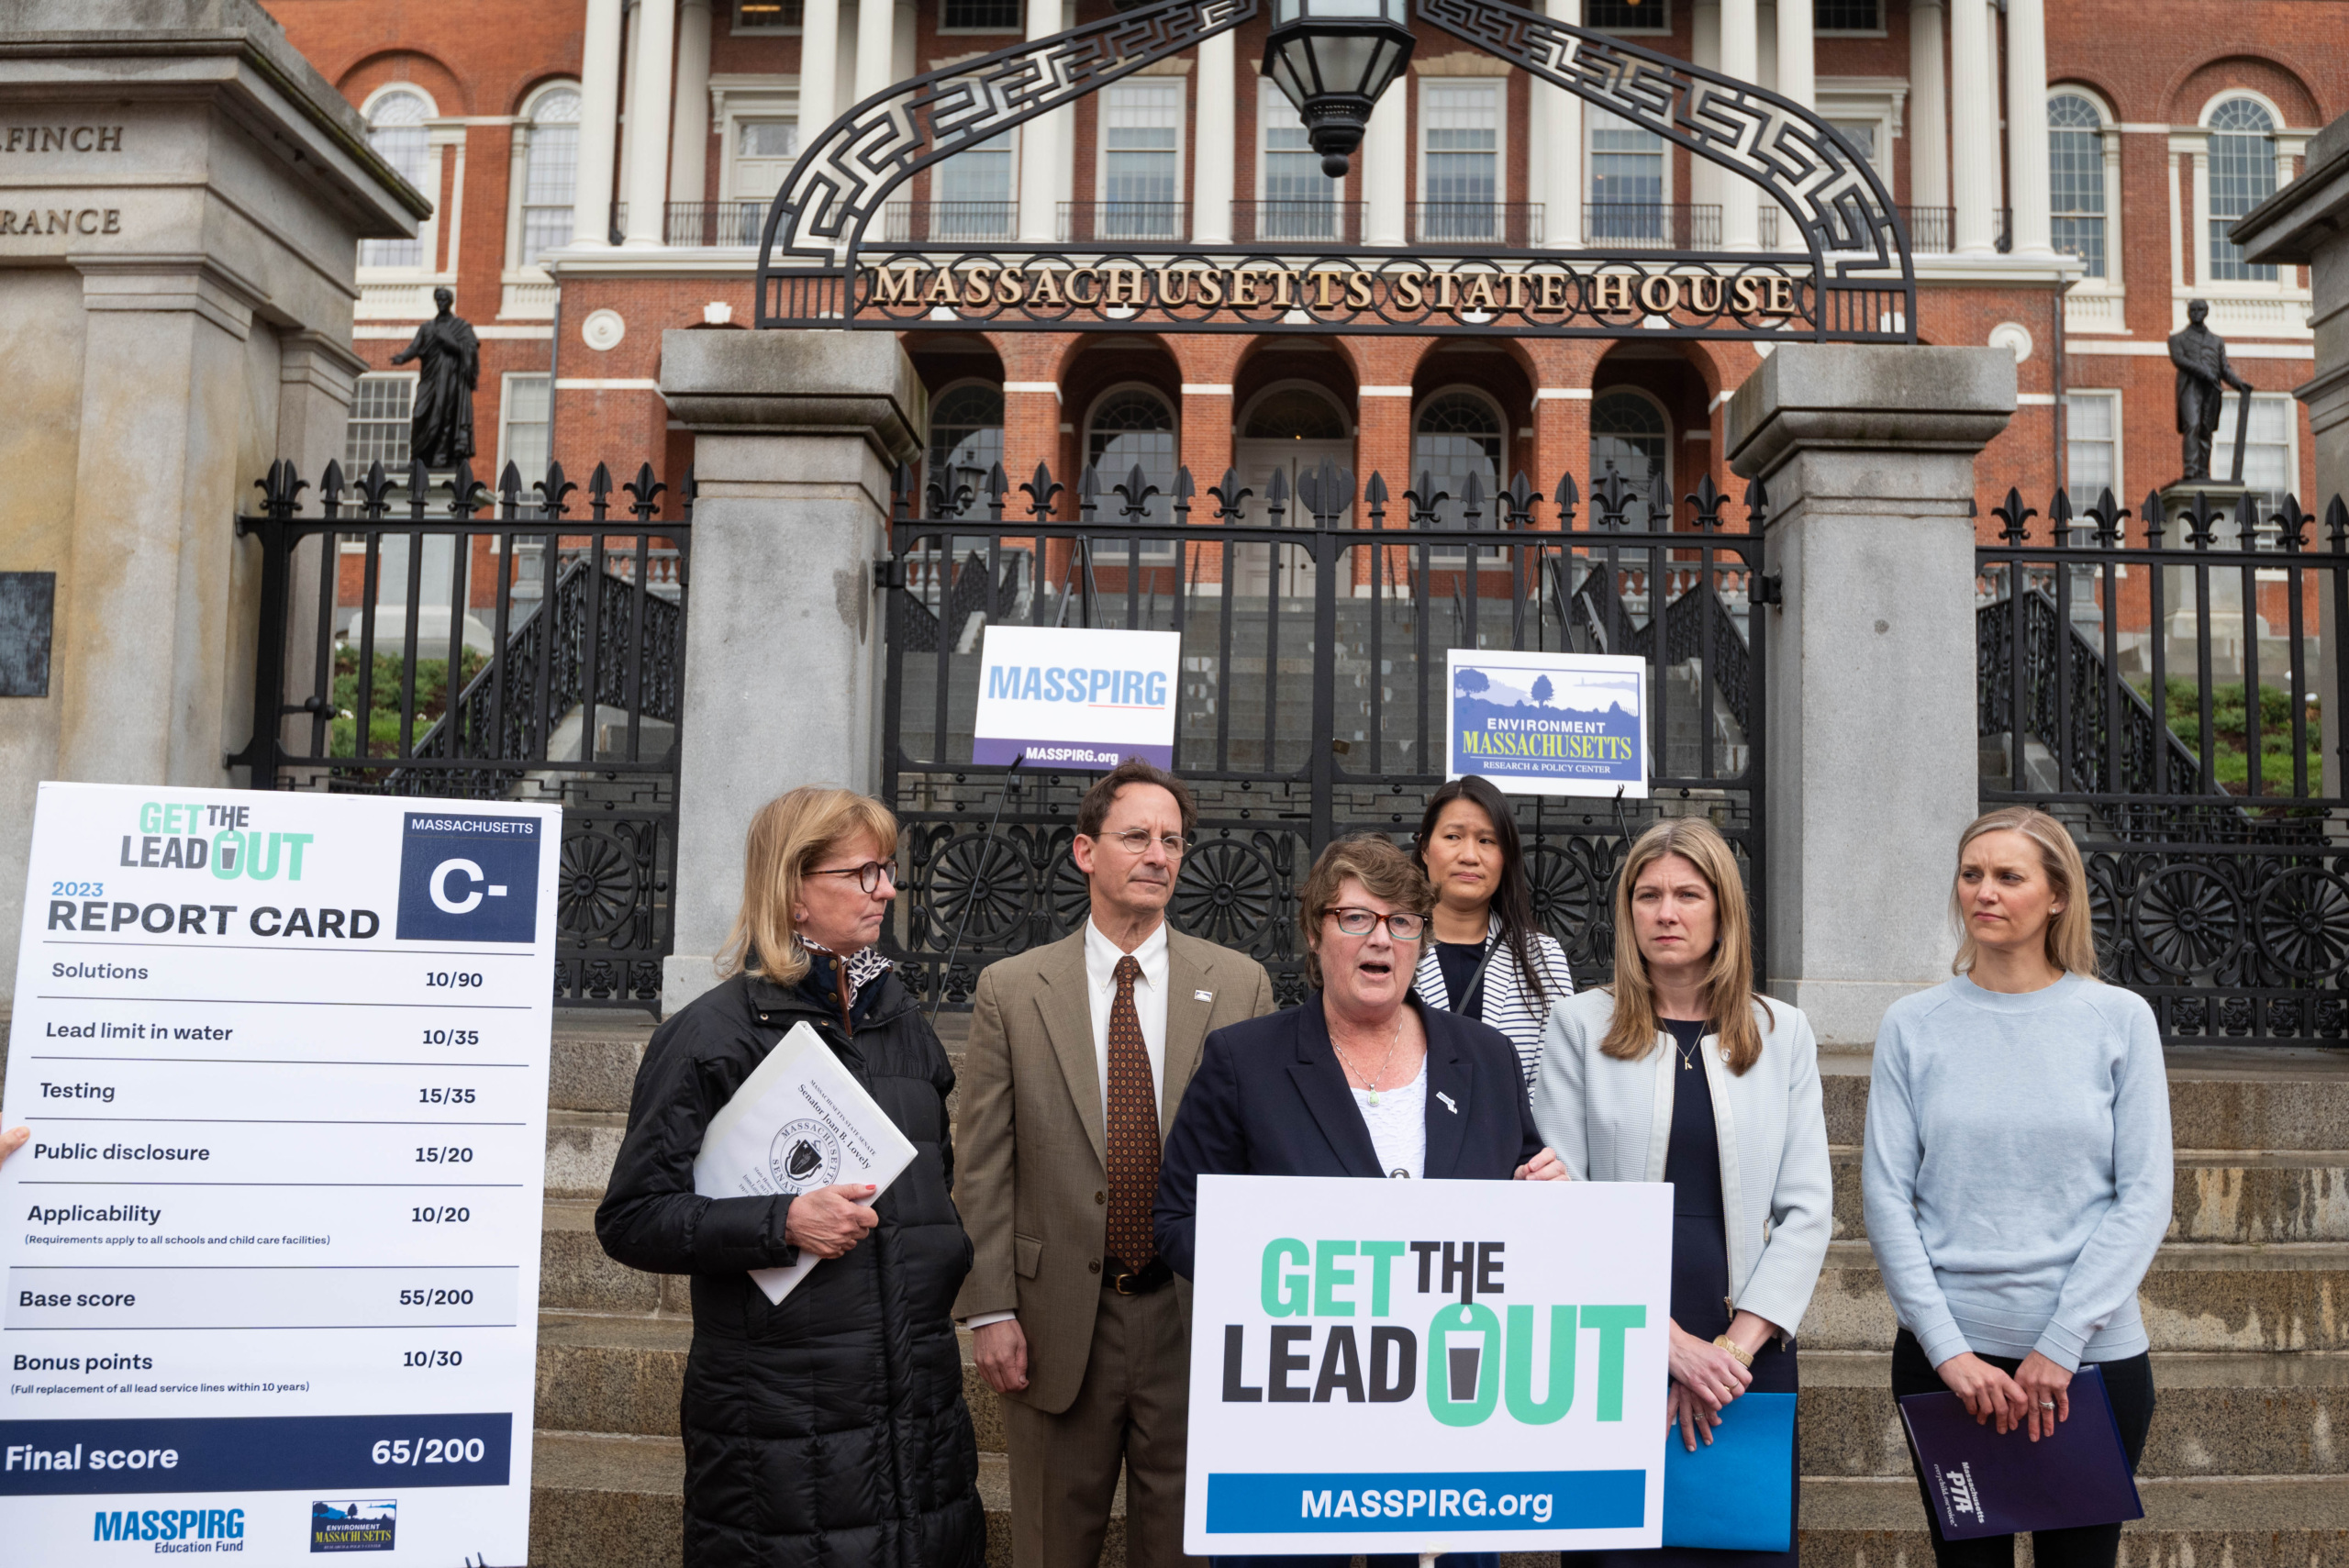 Get the Lead out press event in MA. Deirdre